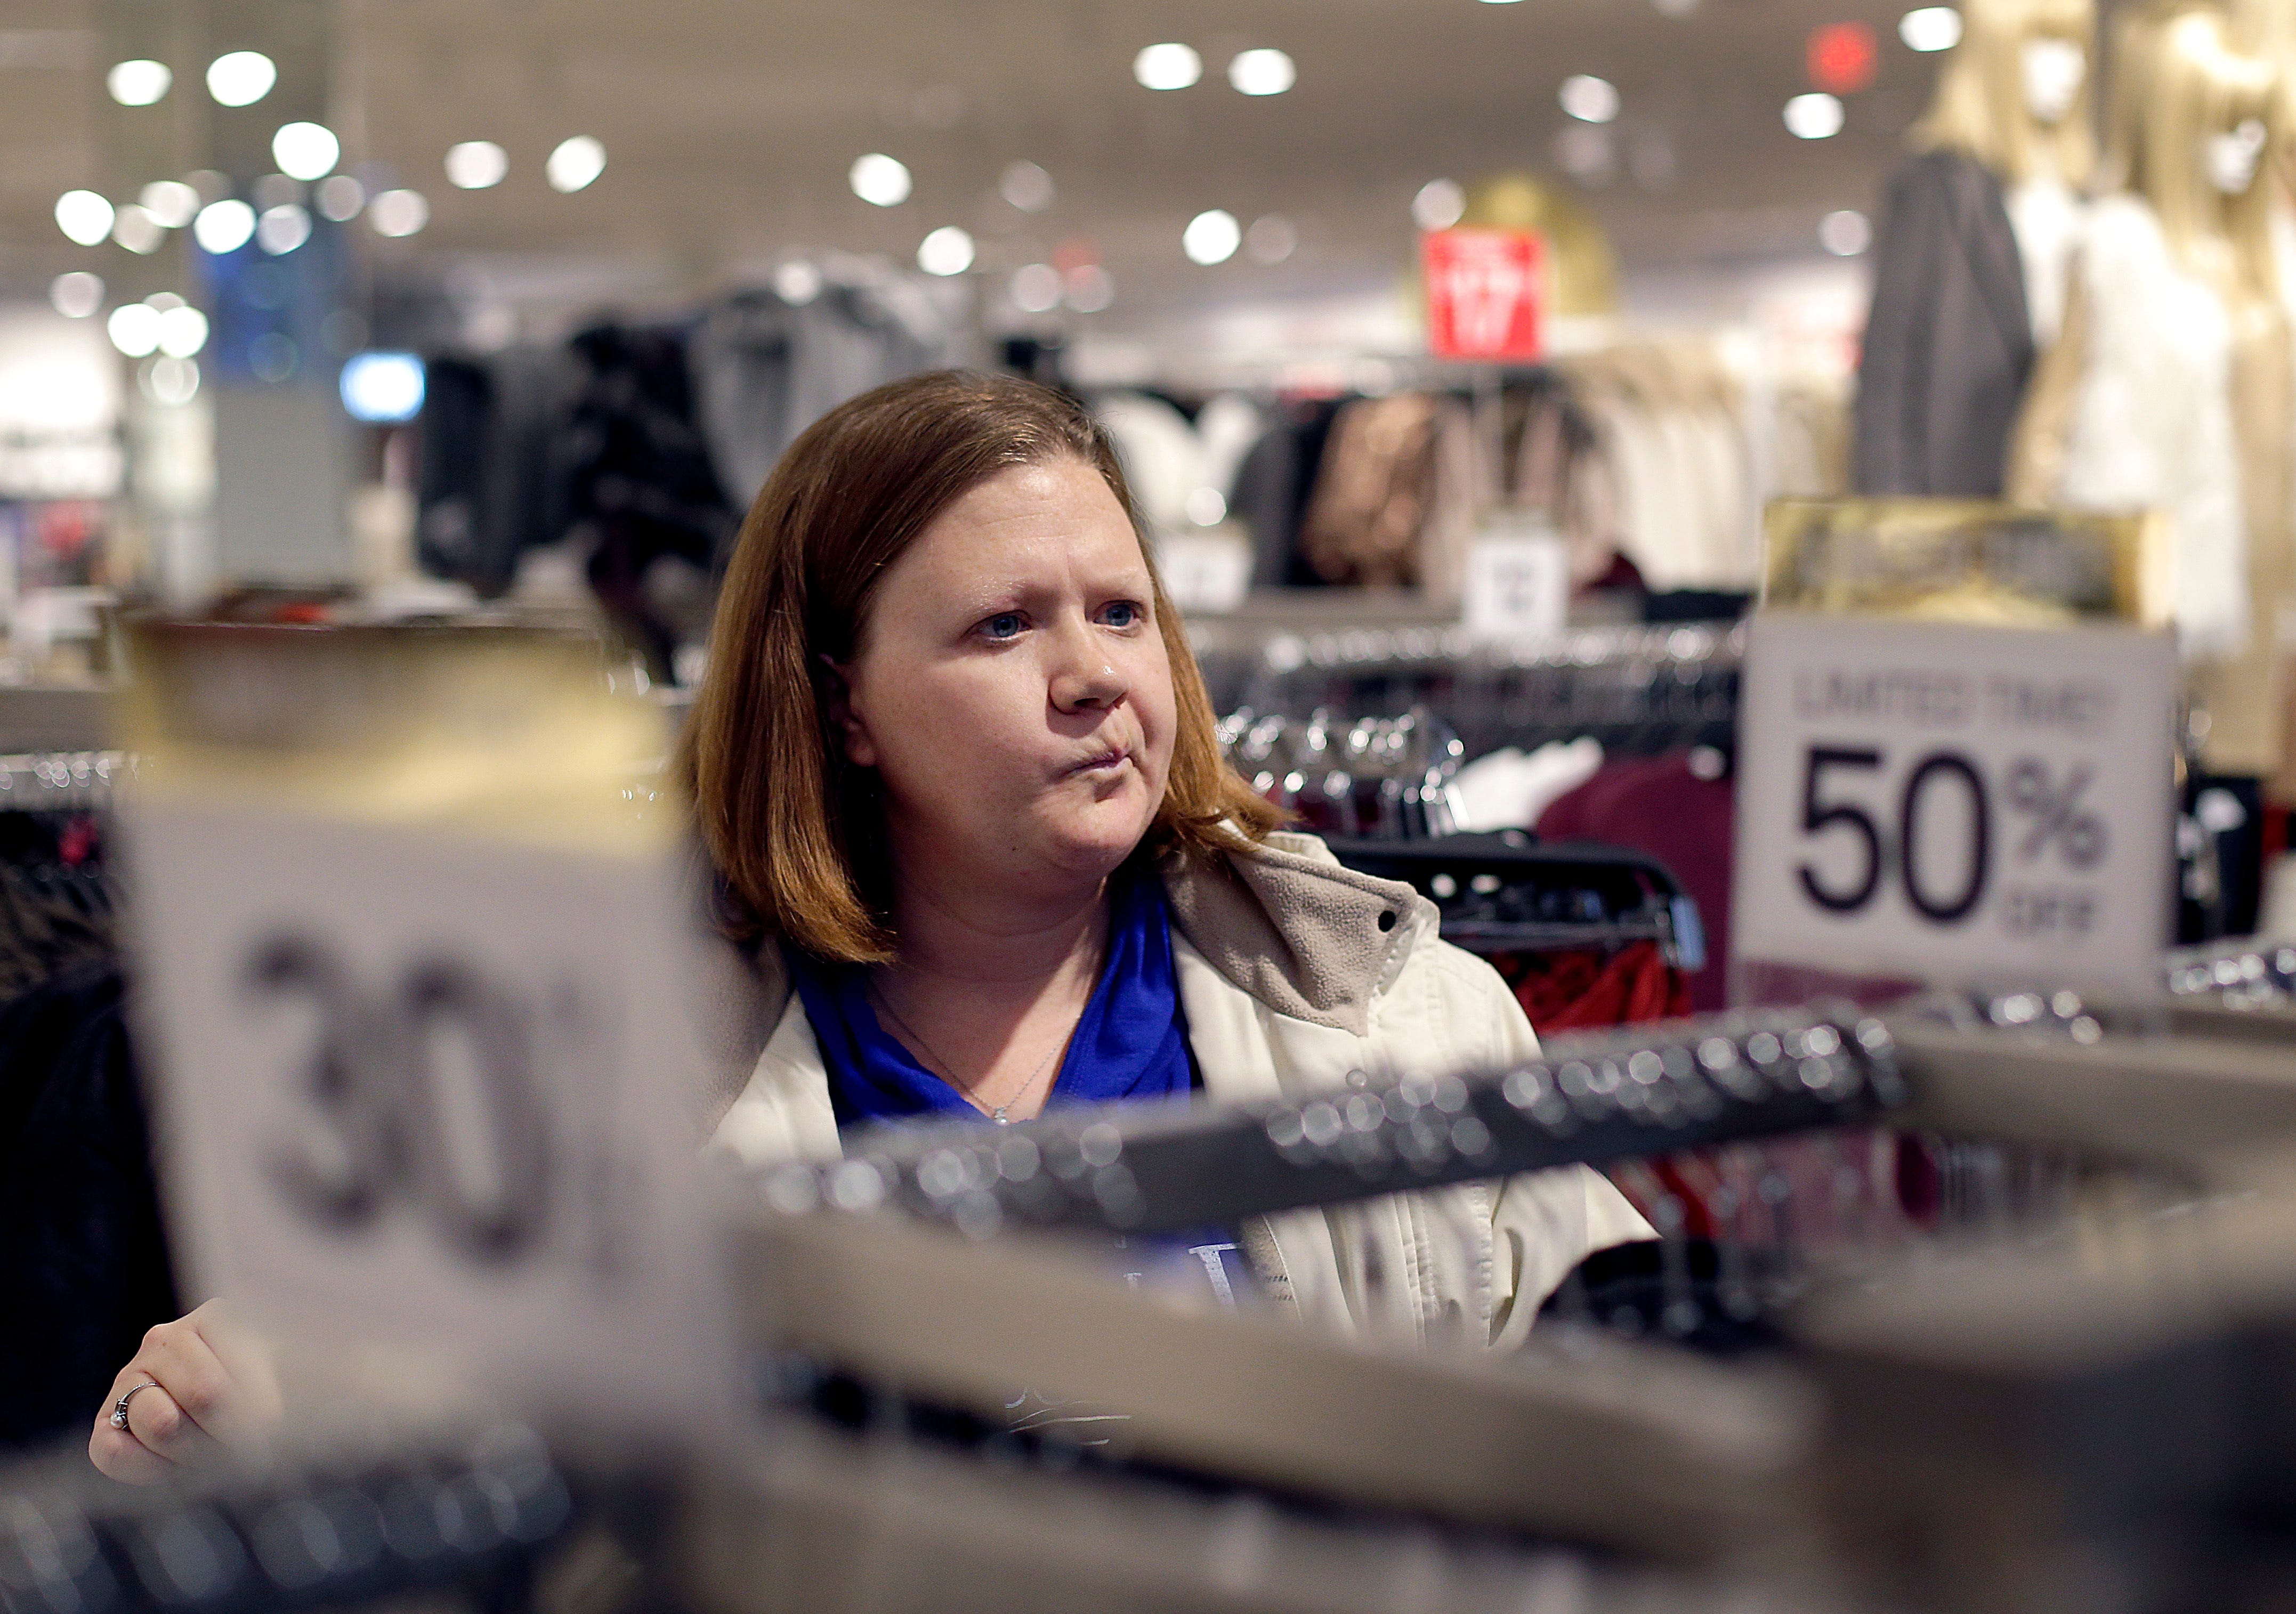 Forever 21 may close more than 100 stores in bankruptcy, report says